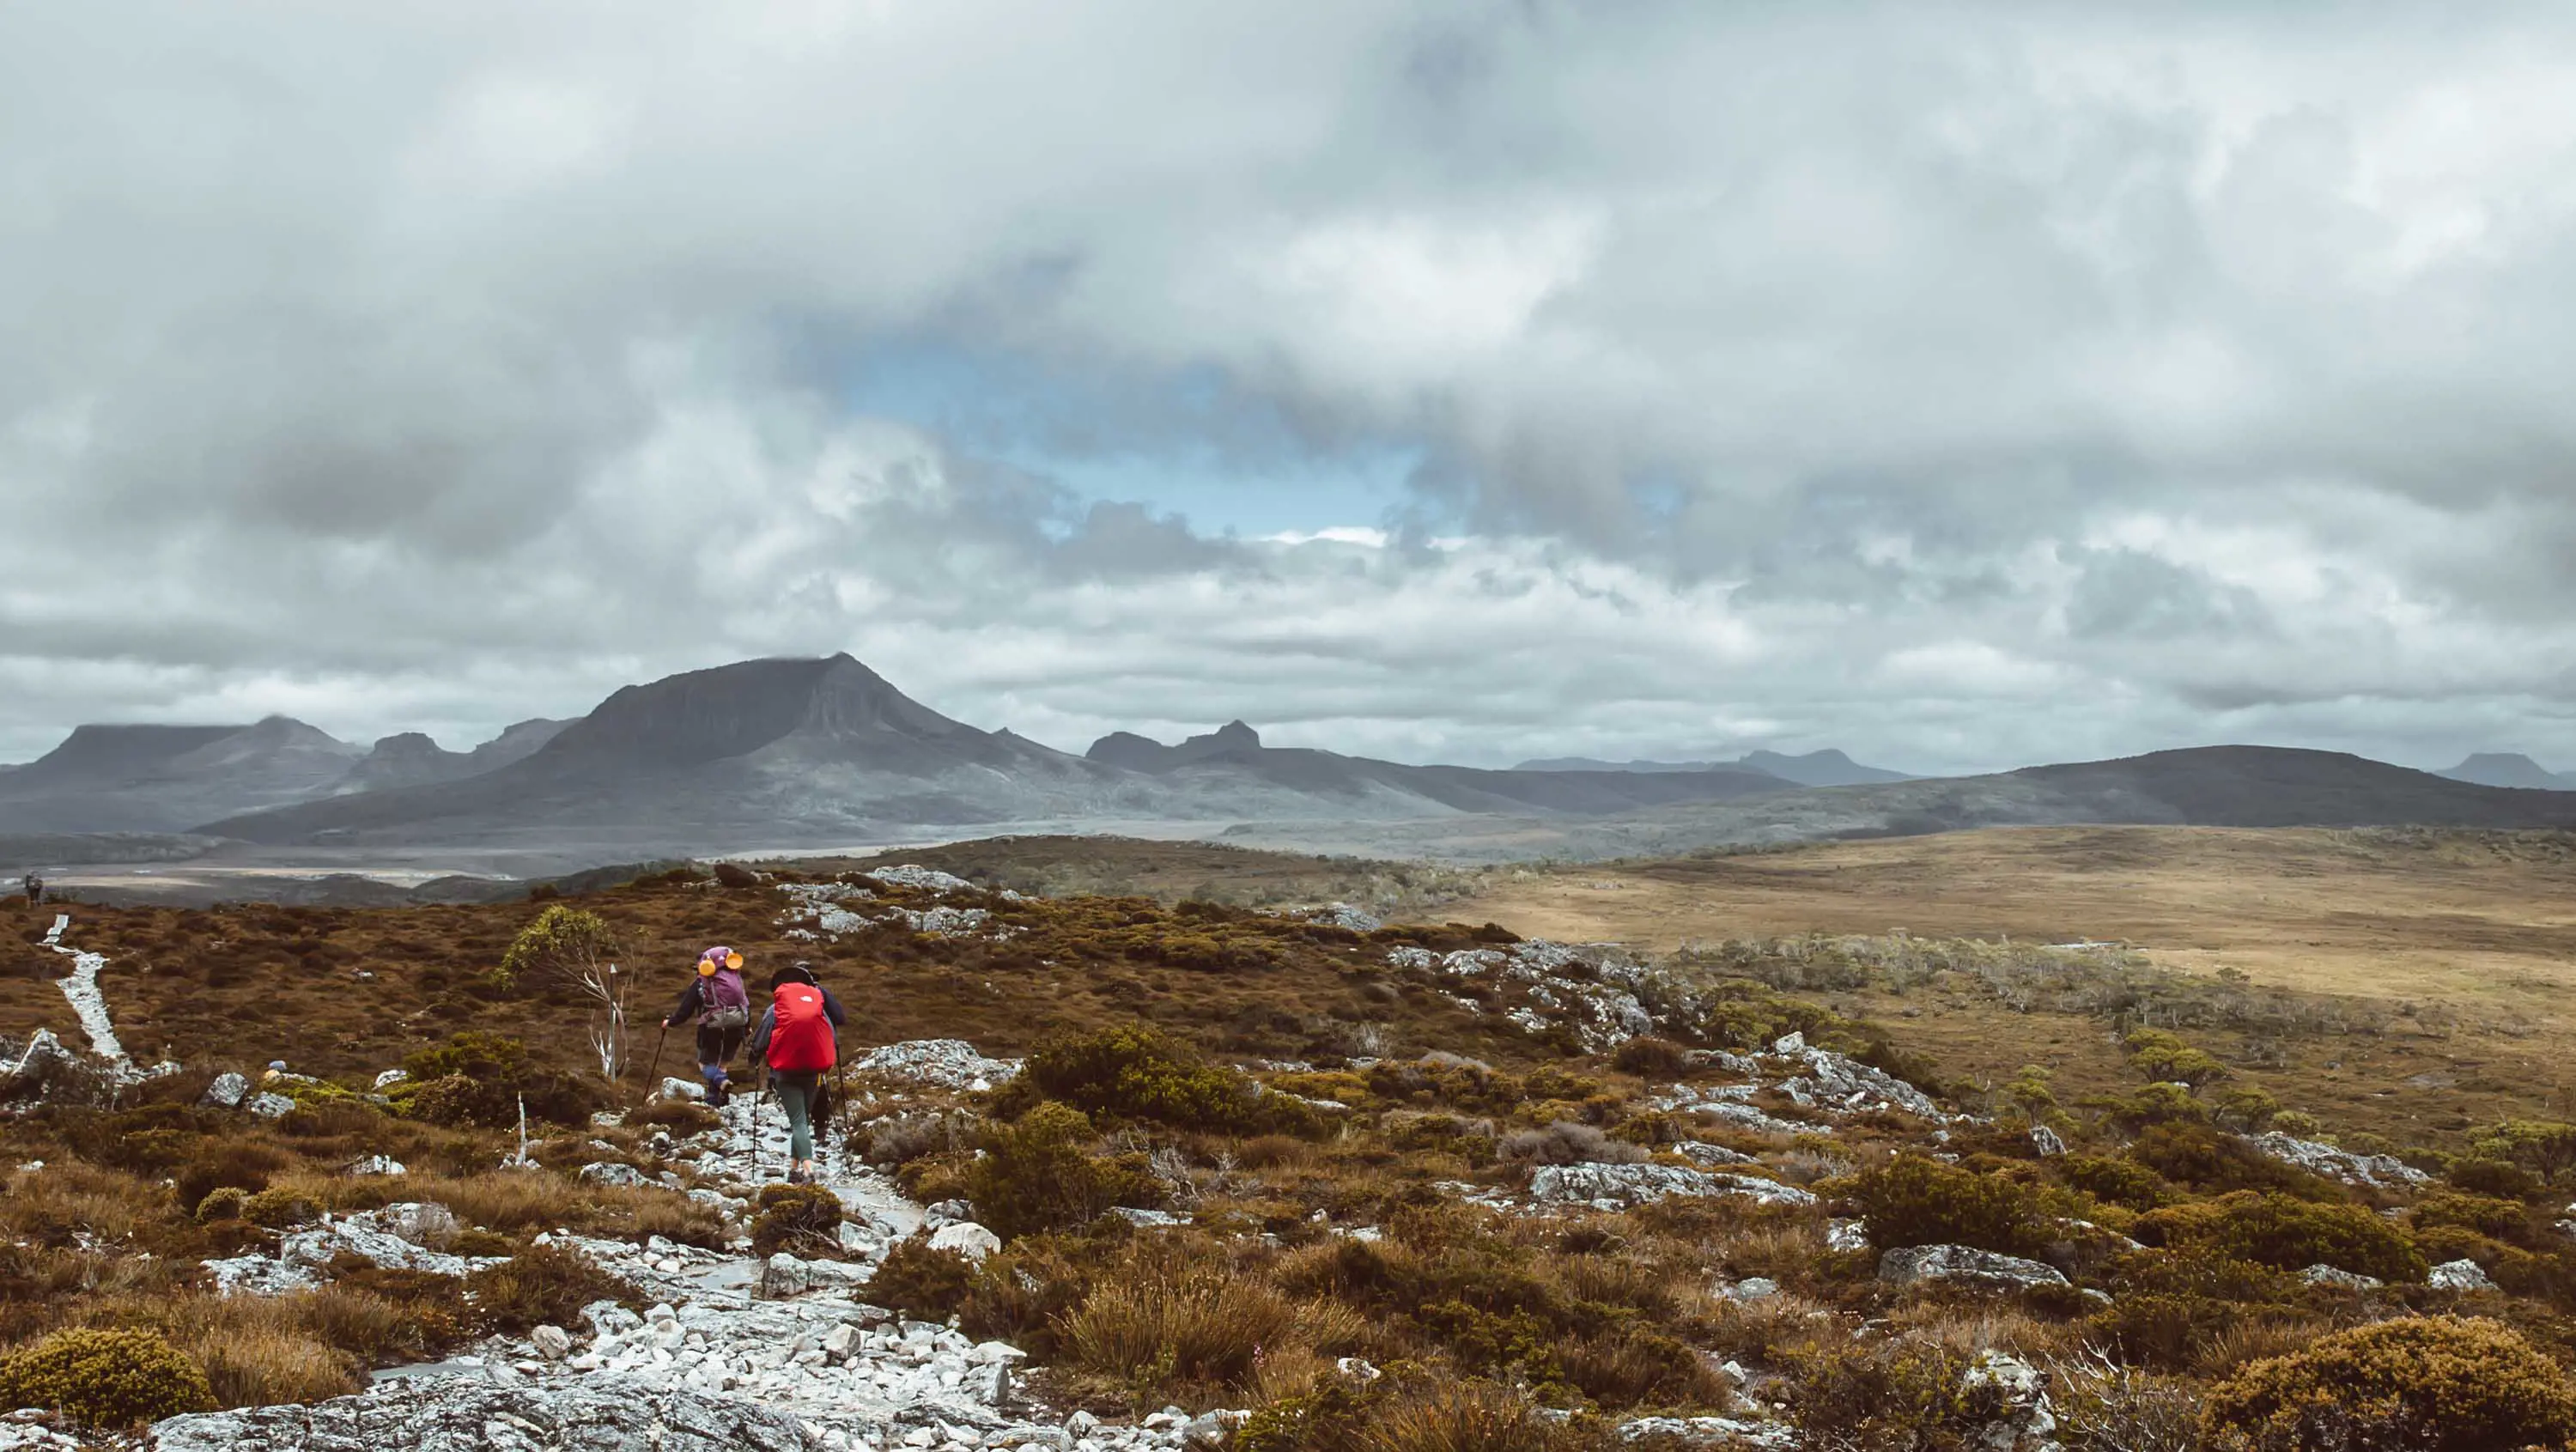 A coupe wearing winter apparel and carrying hiking packs walk along a stony path towards snow capped peaks in the distance on the Overland Track.